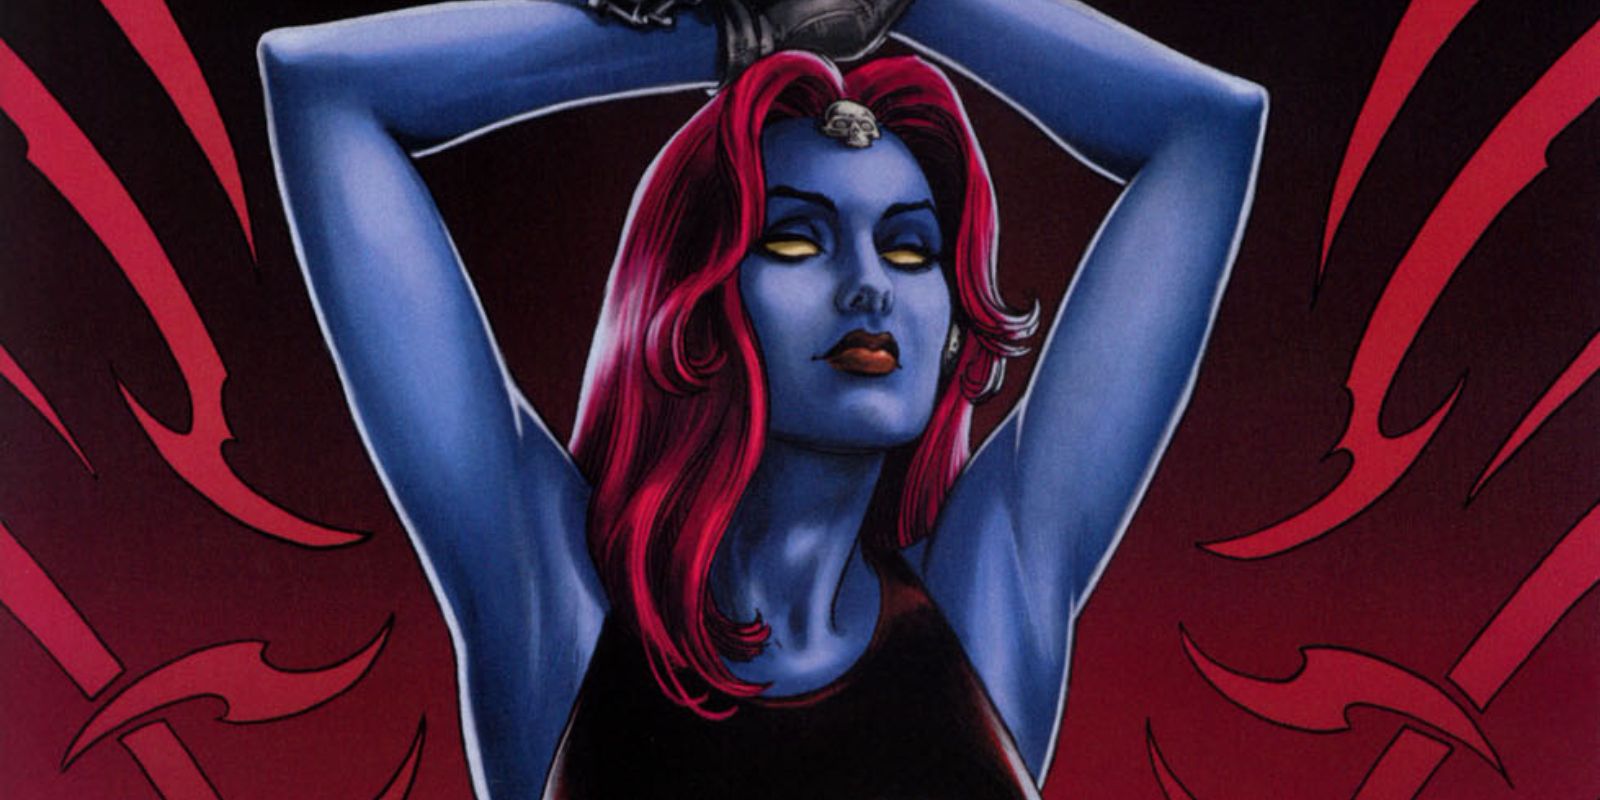 Mystique posing with arms raised in Marvel Comics